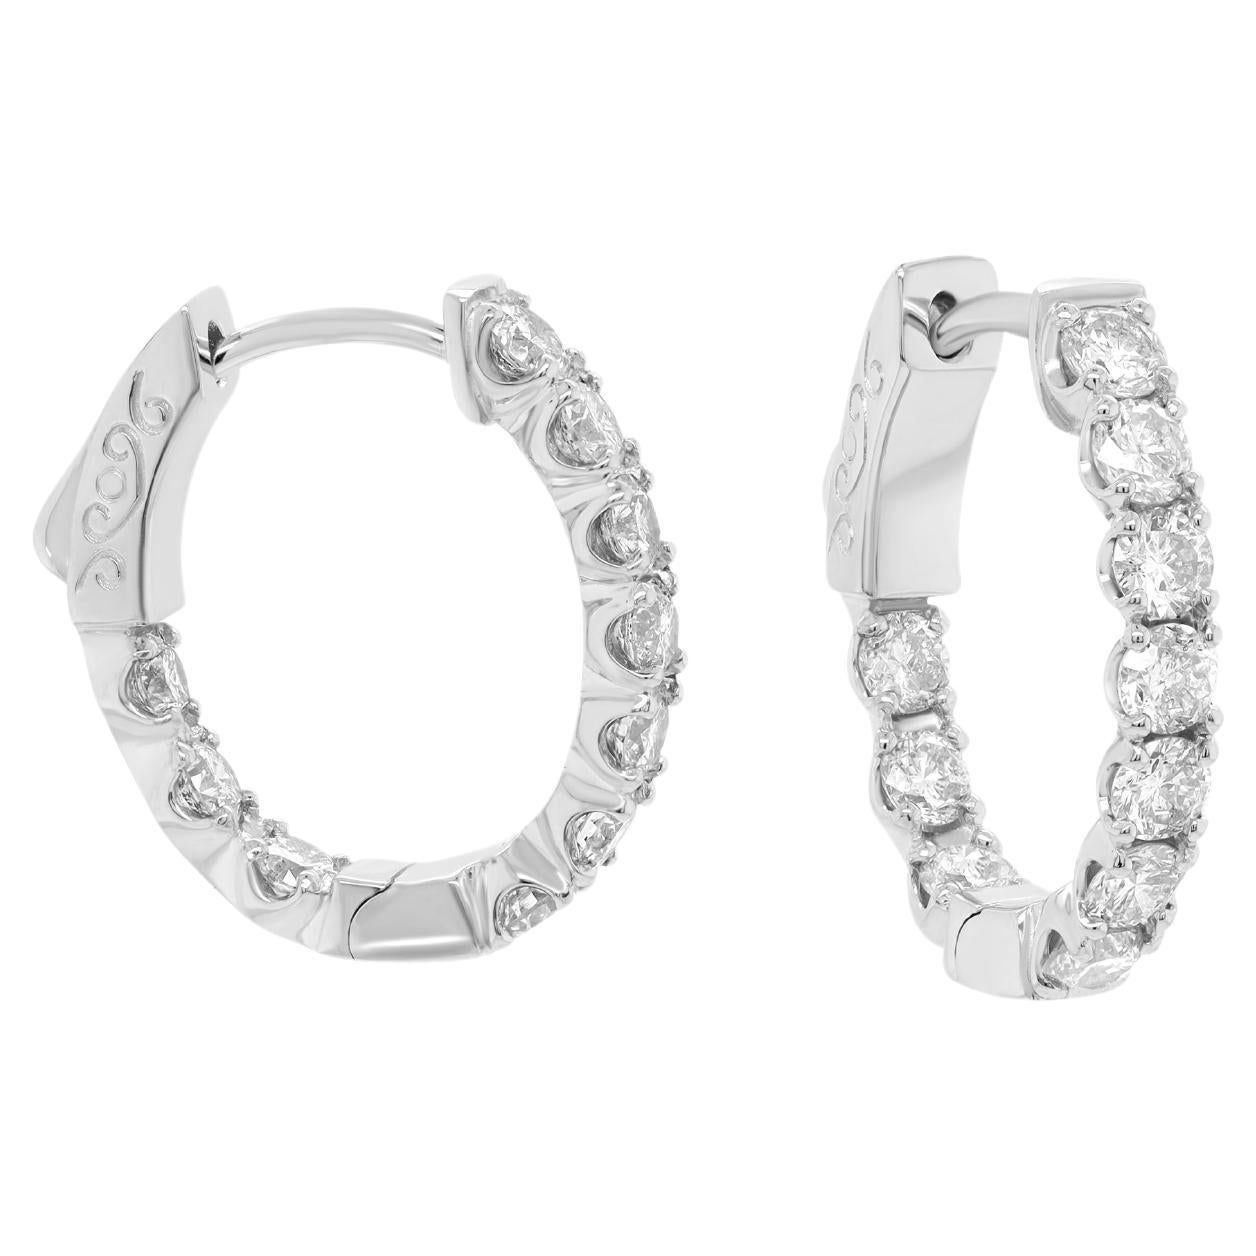 Diana M. 14 kt white gold, .50" oval hoop earrings featuring 1.65 cts tw diamond For Sale